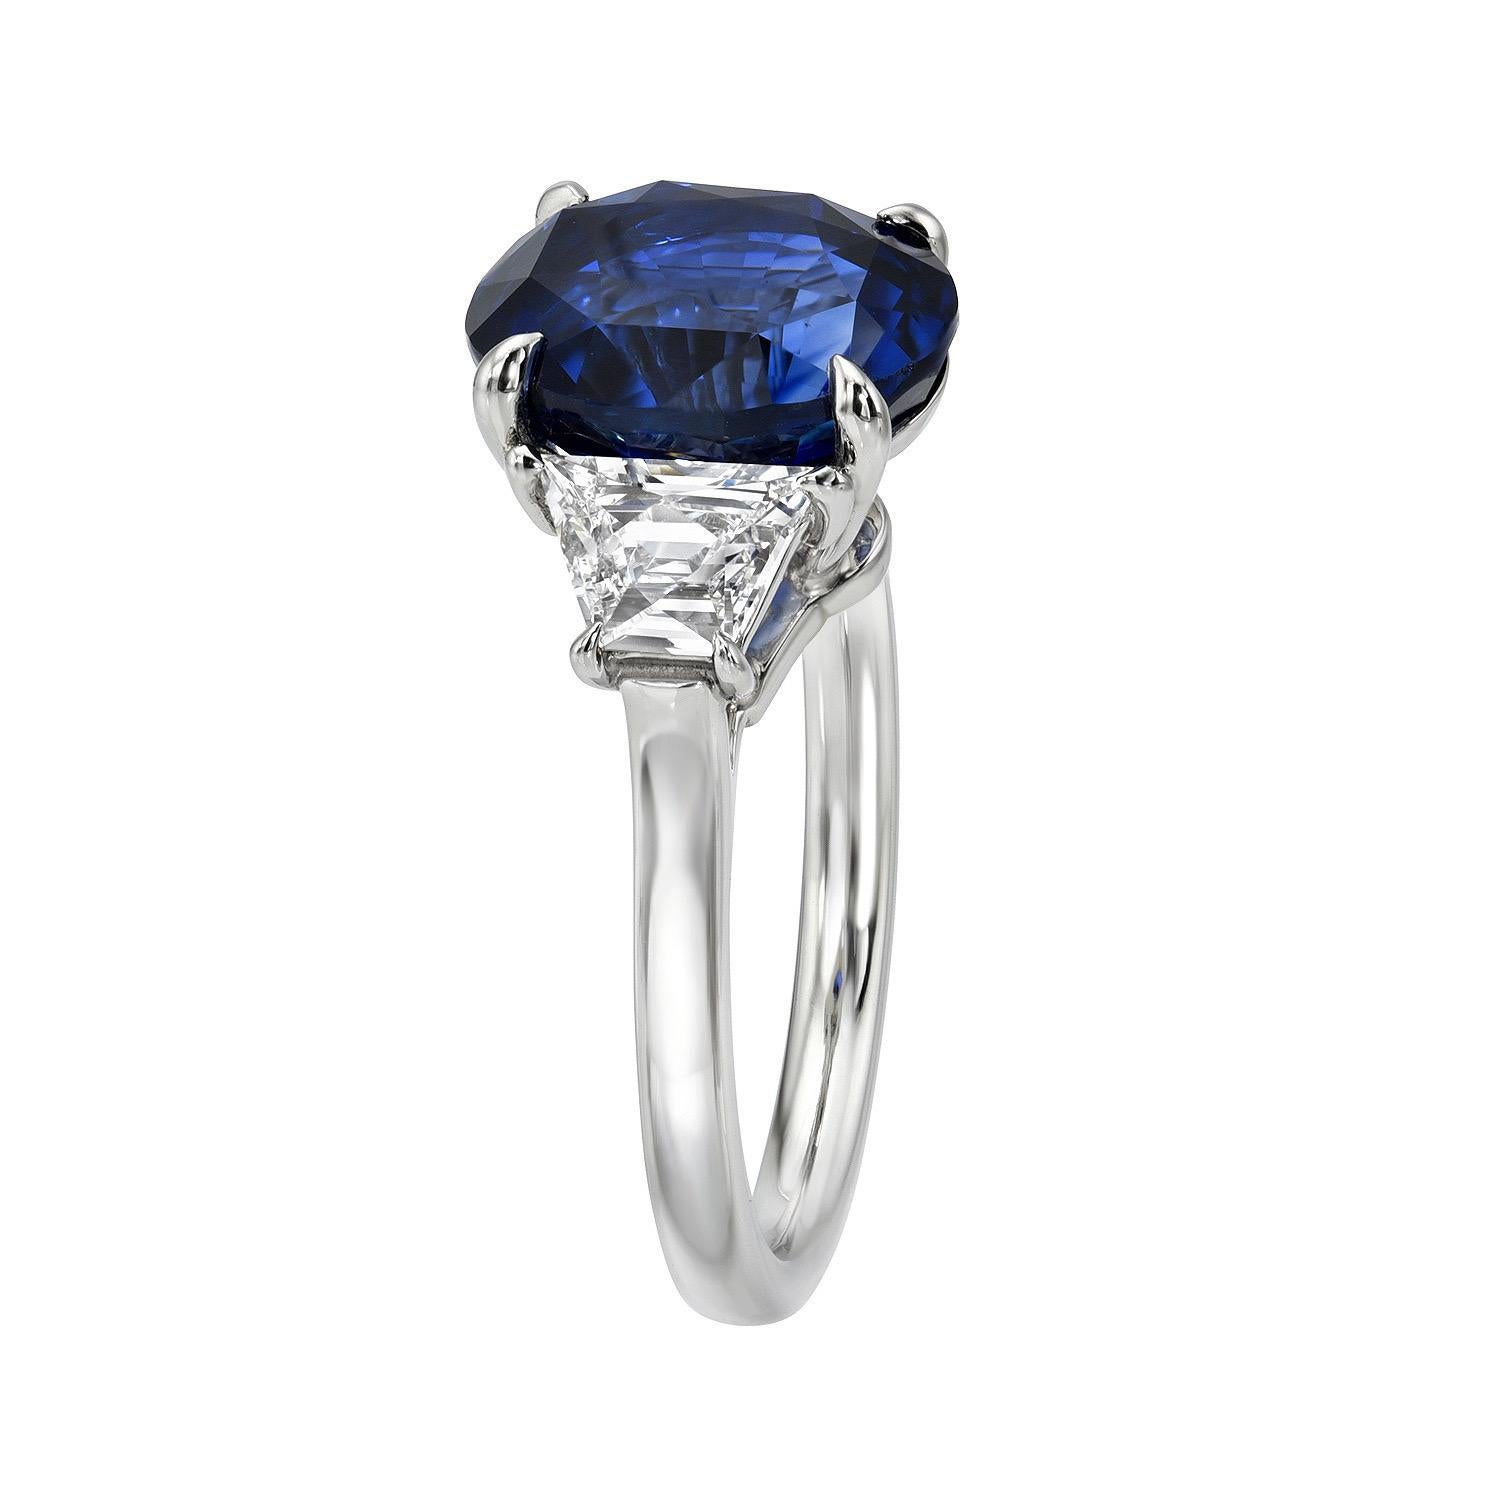 5.08 Carat Royal Blue Sapphire oval platinum three stone ring, flanked by a pair of 0.88 carat, E/VS French cut Trapezoid diamonds. 
Ring size 6. Resizing is complementary upon request.
The GIA gem report is attached to the image selection for your